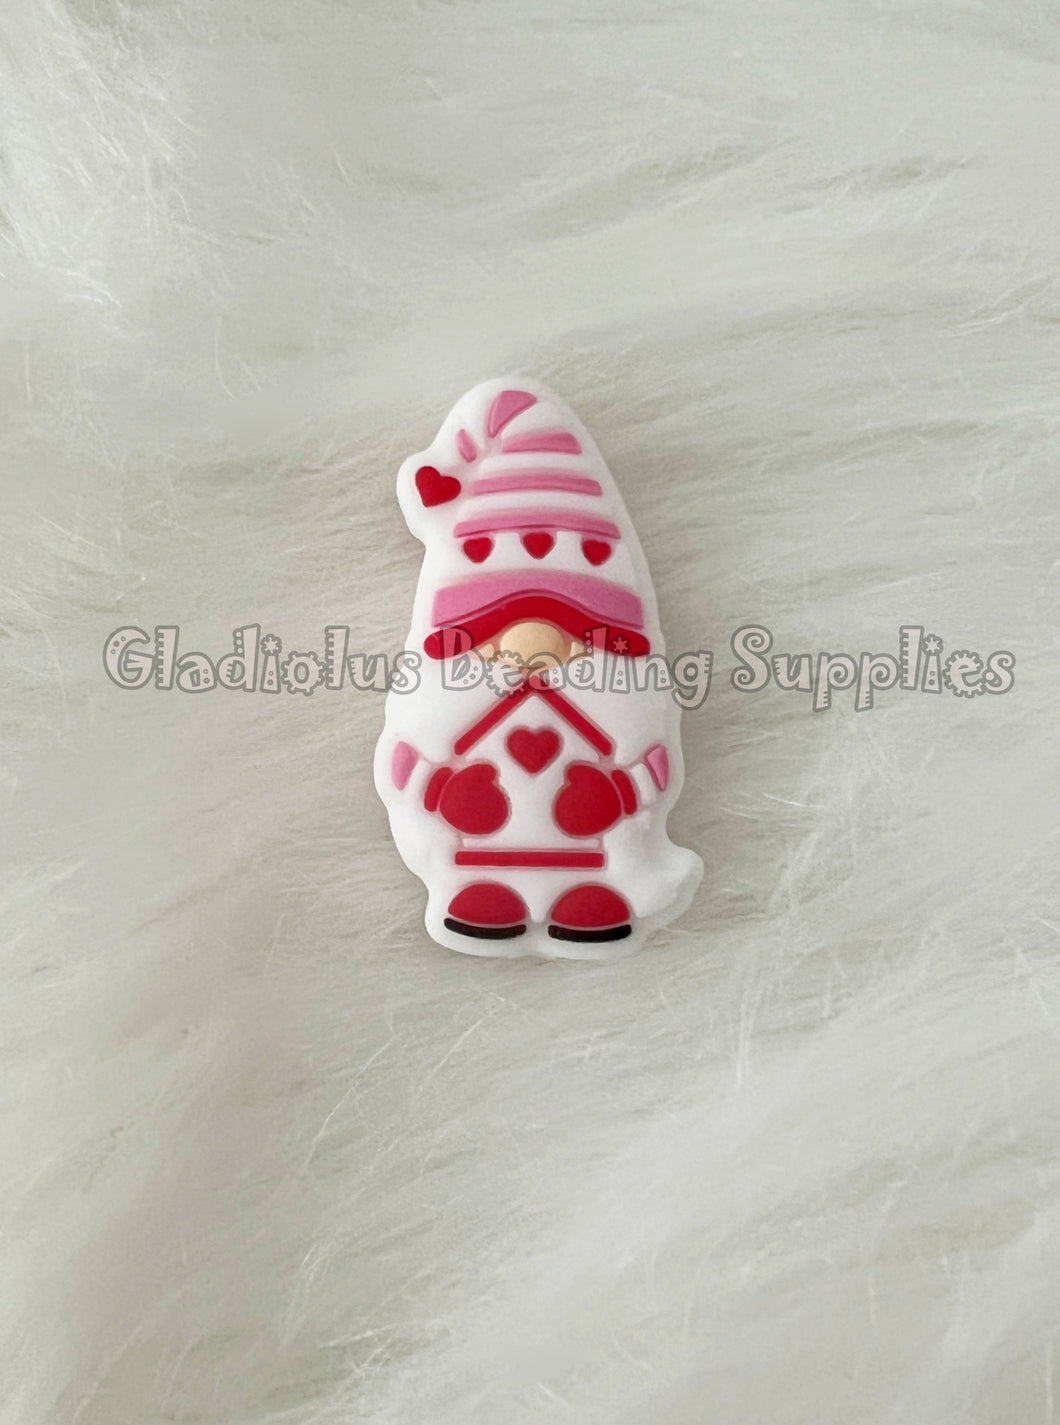 1 Pc 19mm*27mm - Gnome Focal Beads - Silicone Beads - Focal Beads - Va –  Gladiolus Beading Supplies LLC